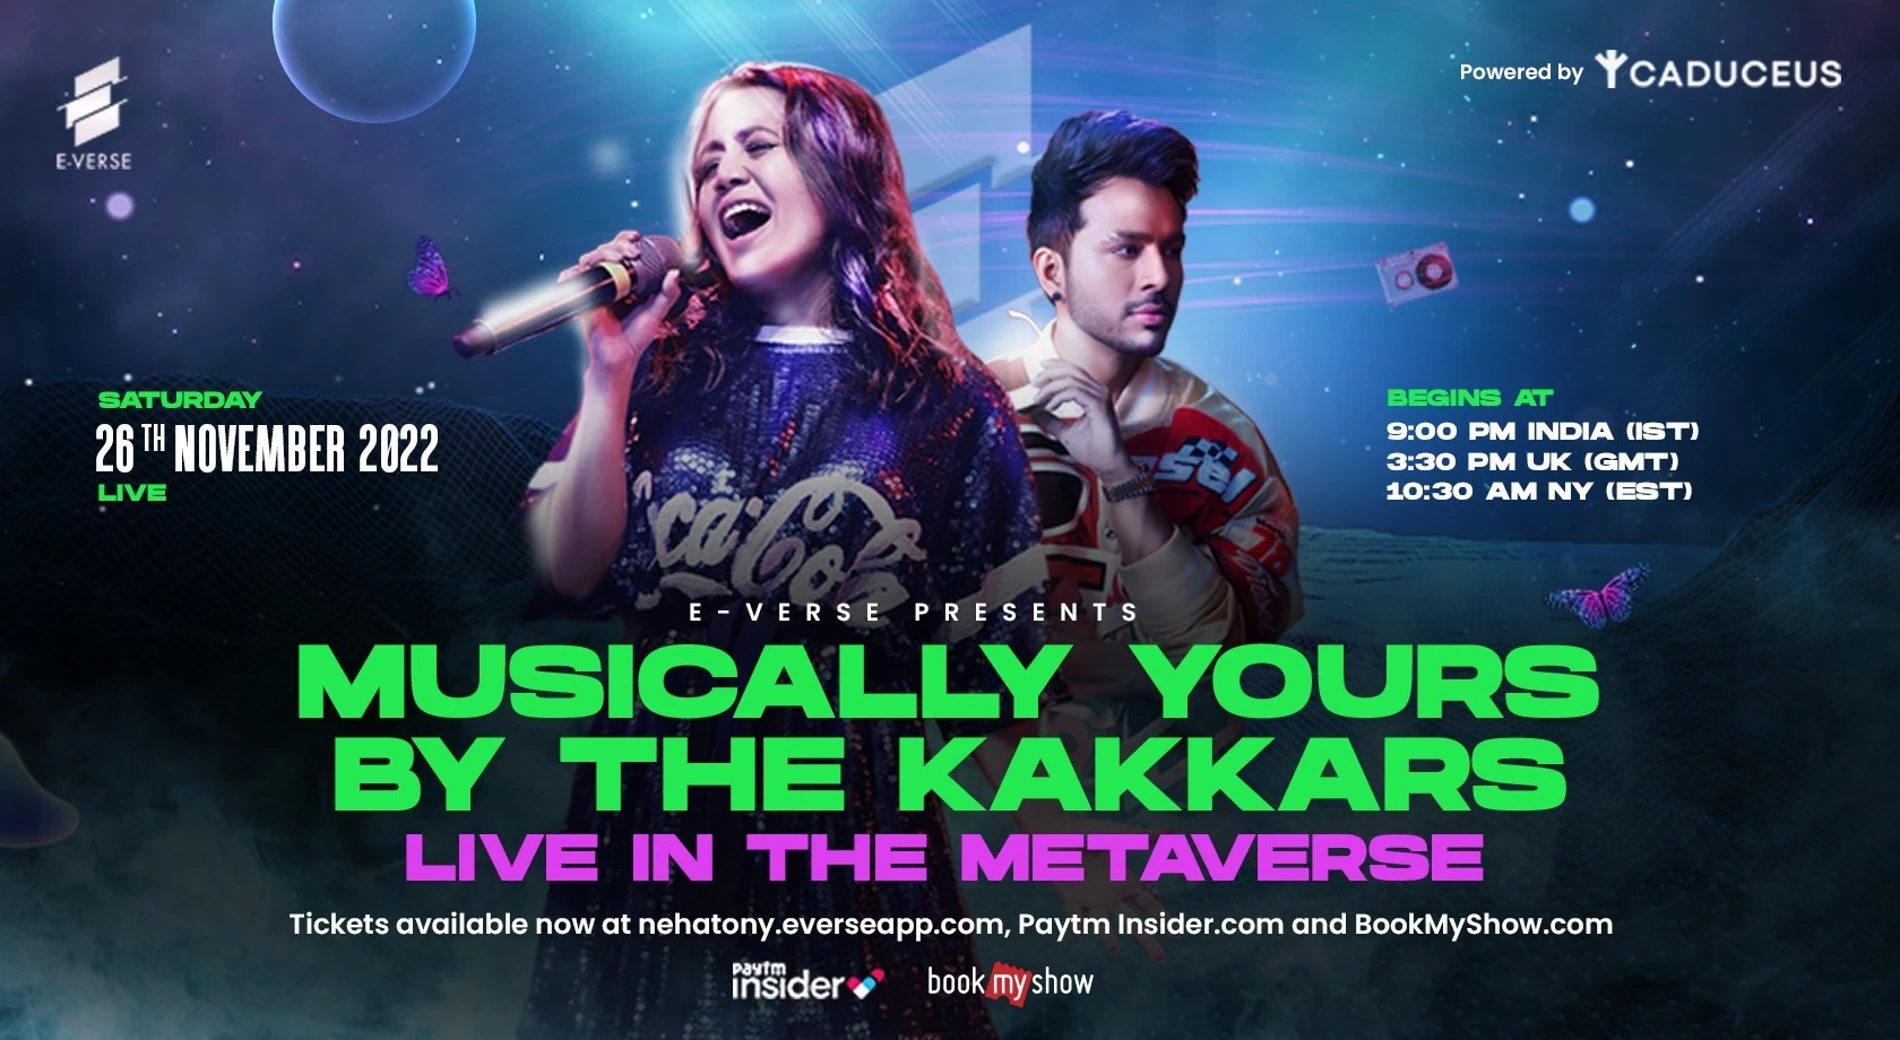 Musically Yours by the Kakkars